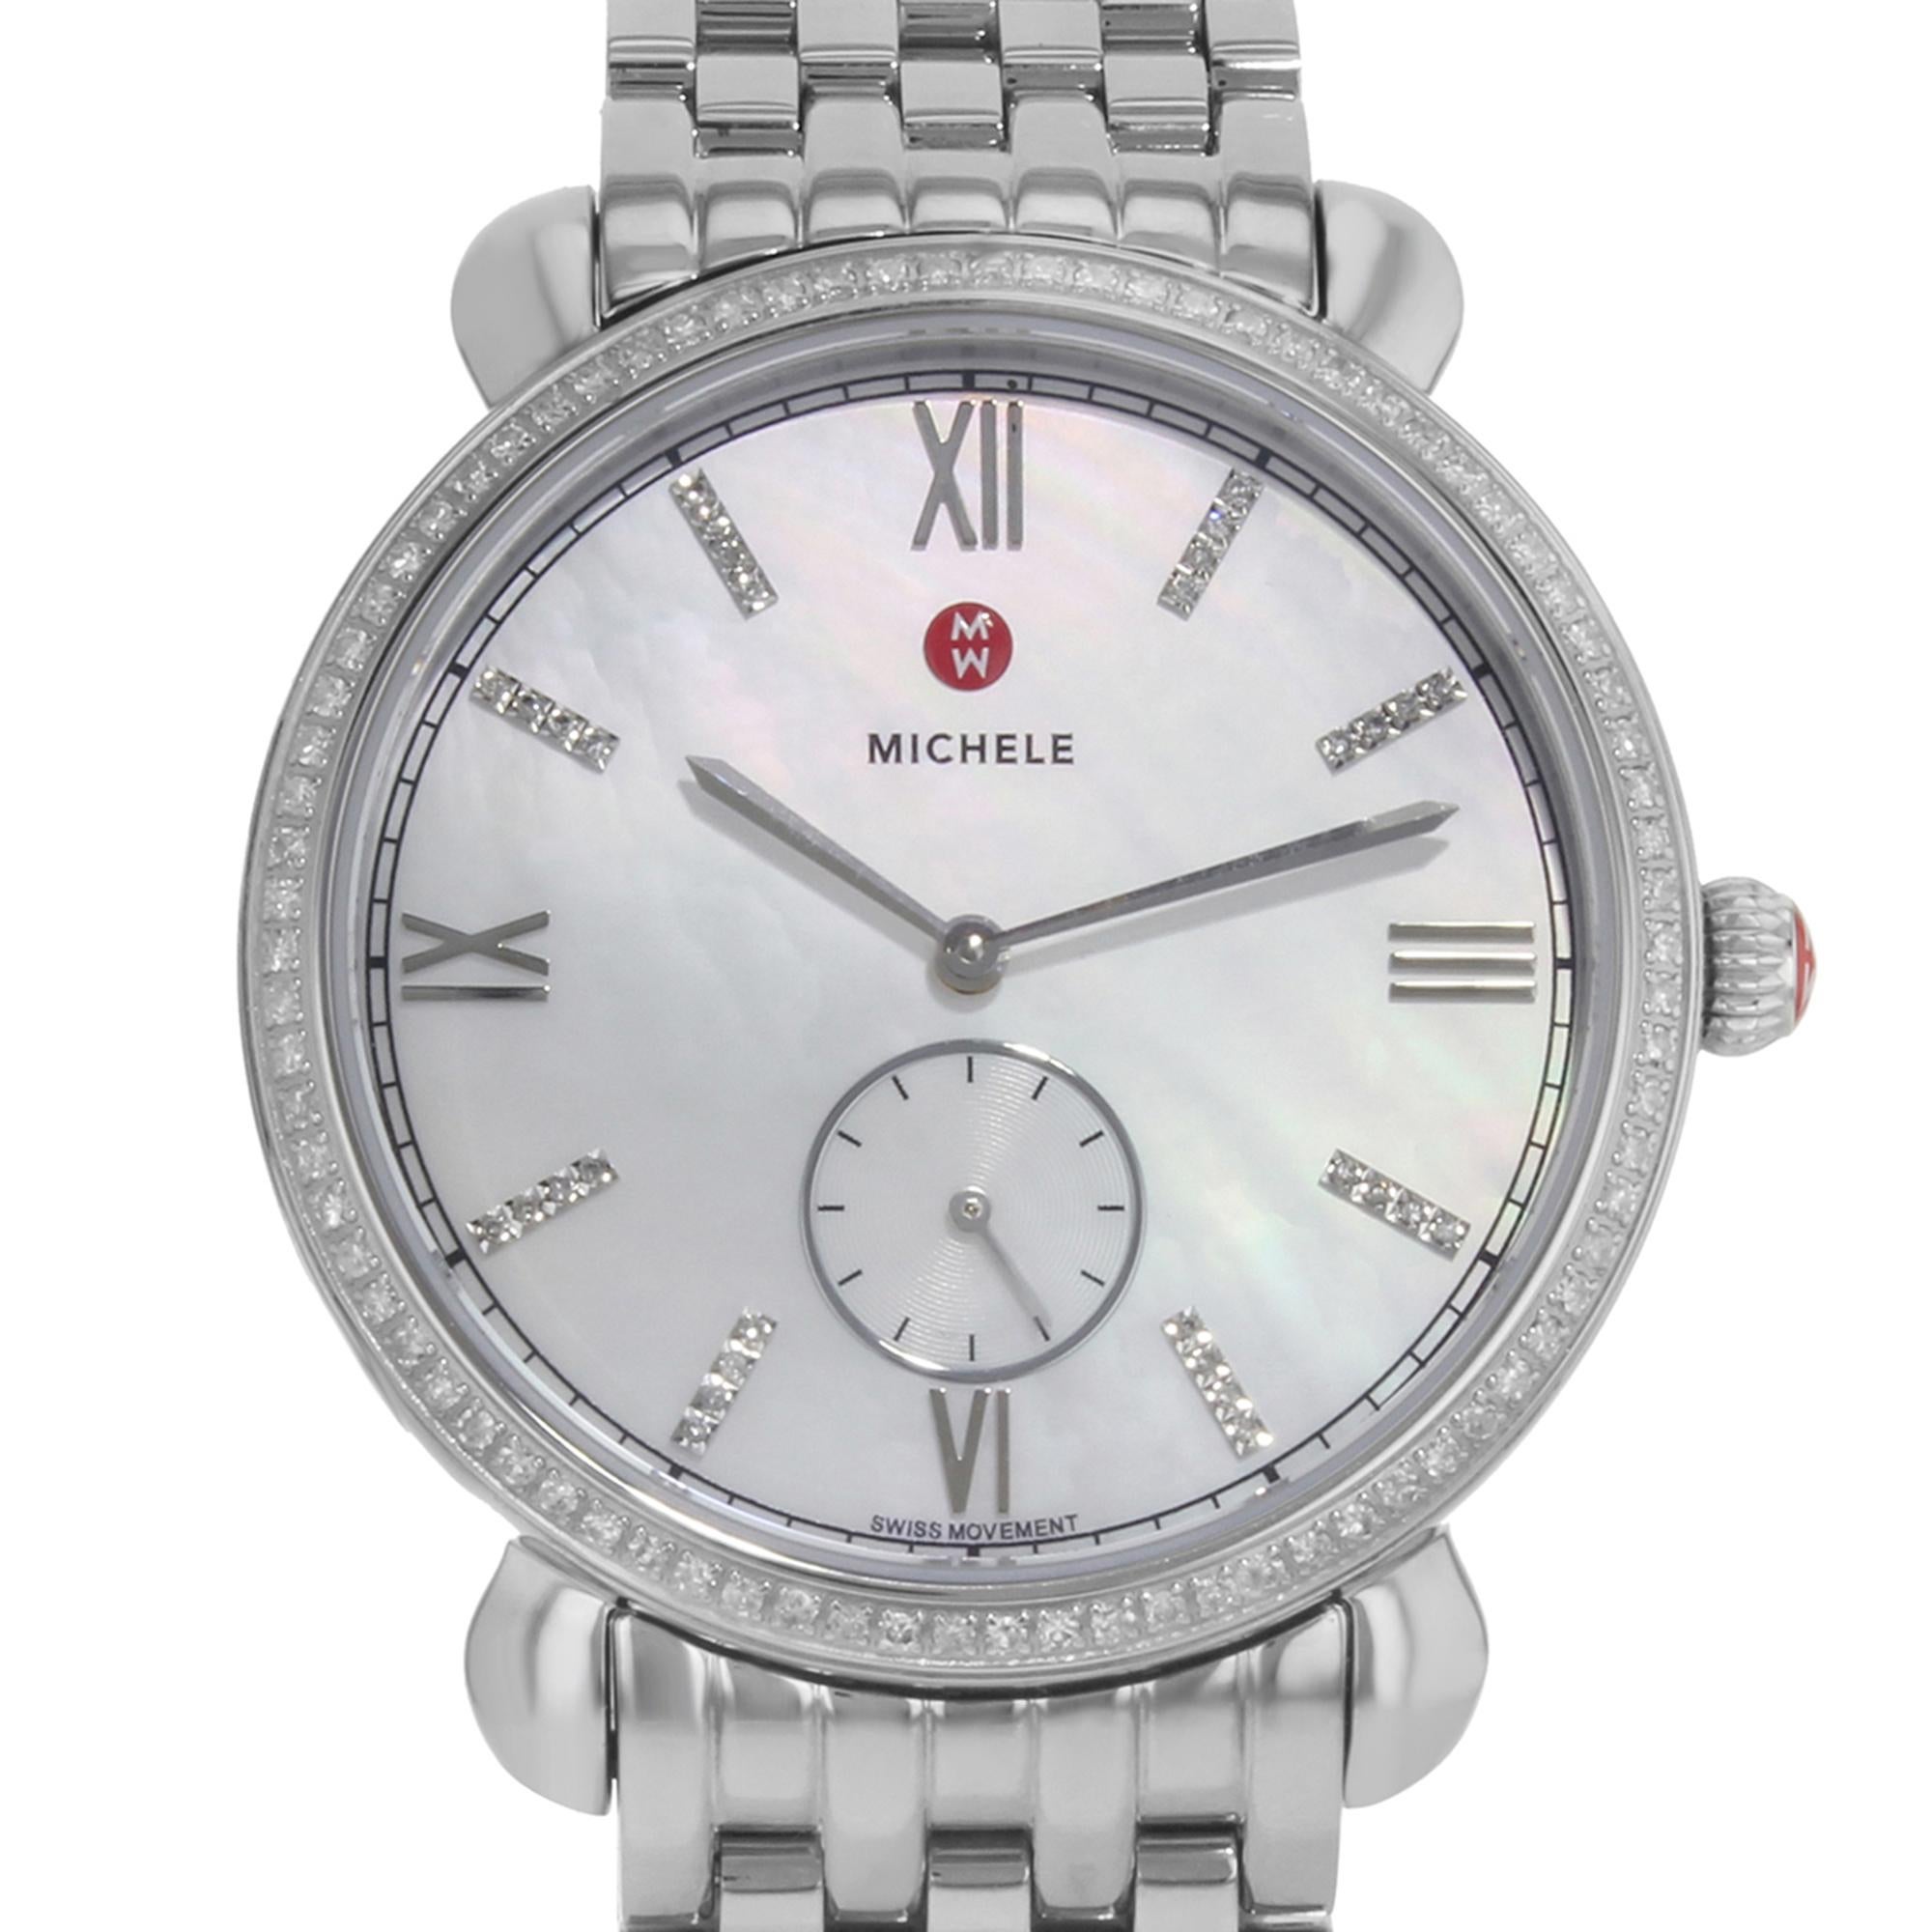 Pre-owned MICHELE Gracile Diamond Bezel MOP Dial Stainless Steel Ladies Watch MWW26A000001 Watch. This Beautiful Timepiece is Powered by Quartz (Battery) Movement And Features: Round Stainless Steel Case with a Stainless Steel Bracelet. Fixed